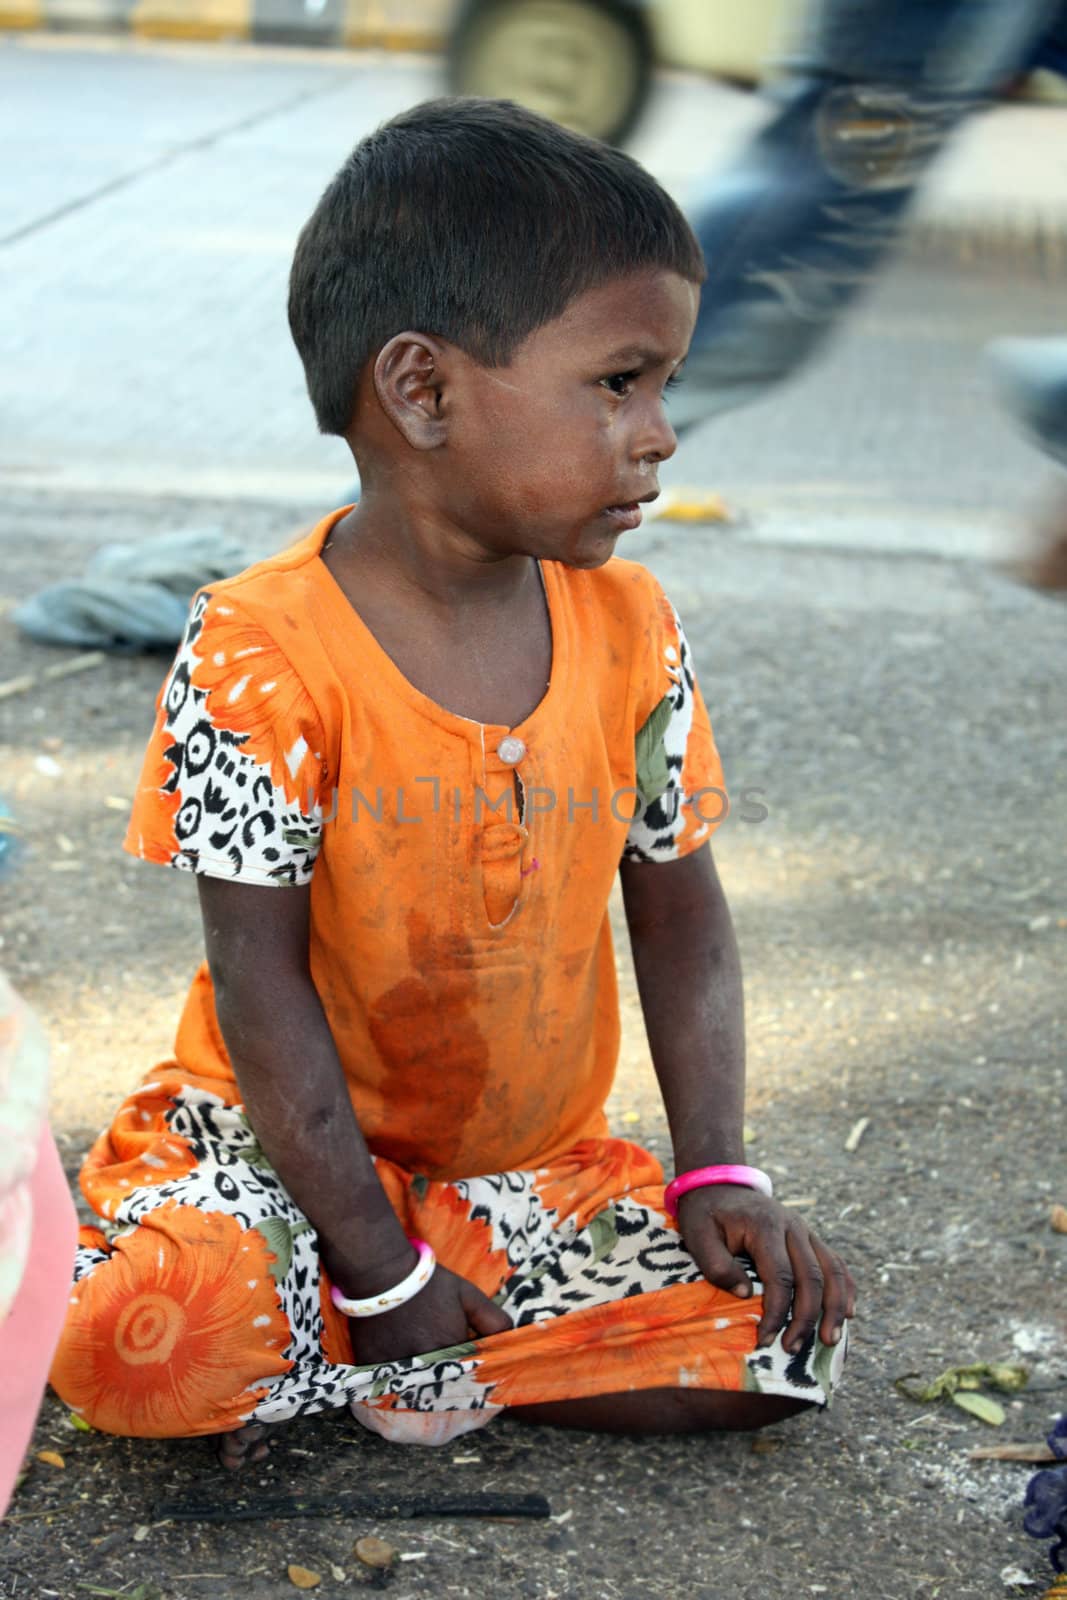 A sick girl from India begging on the streets.